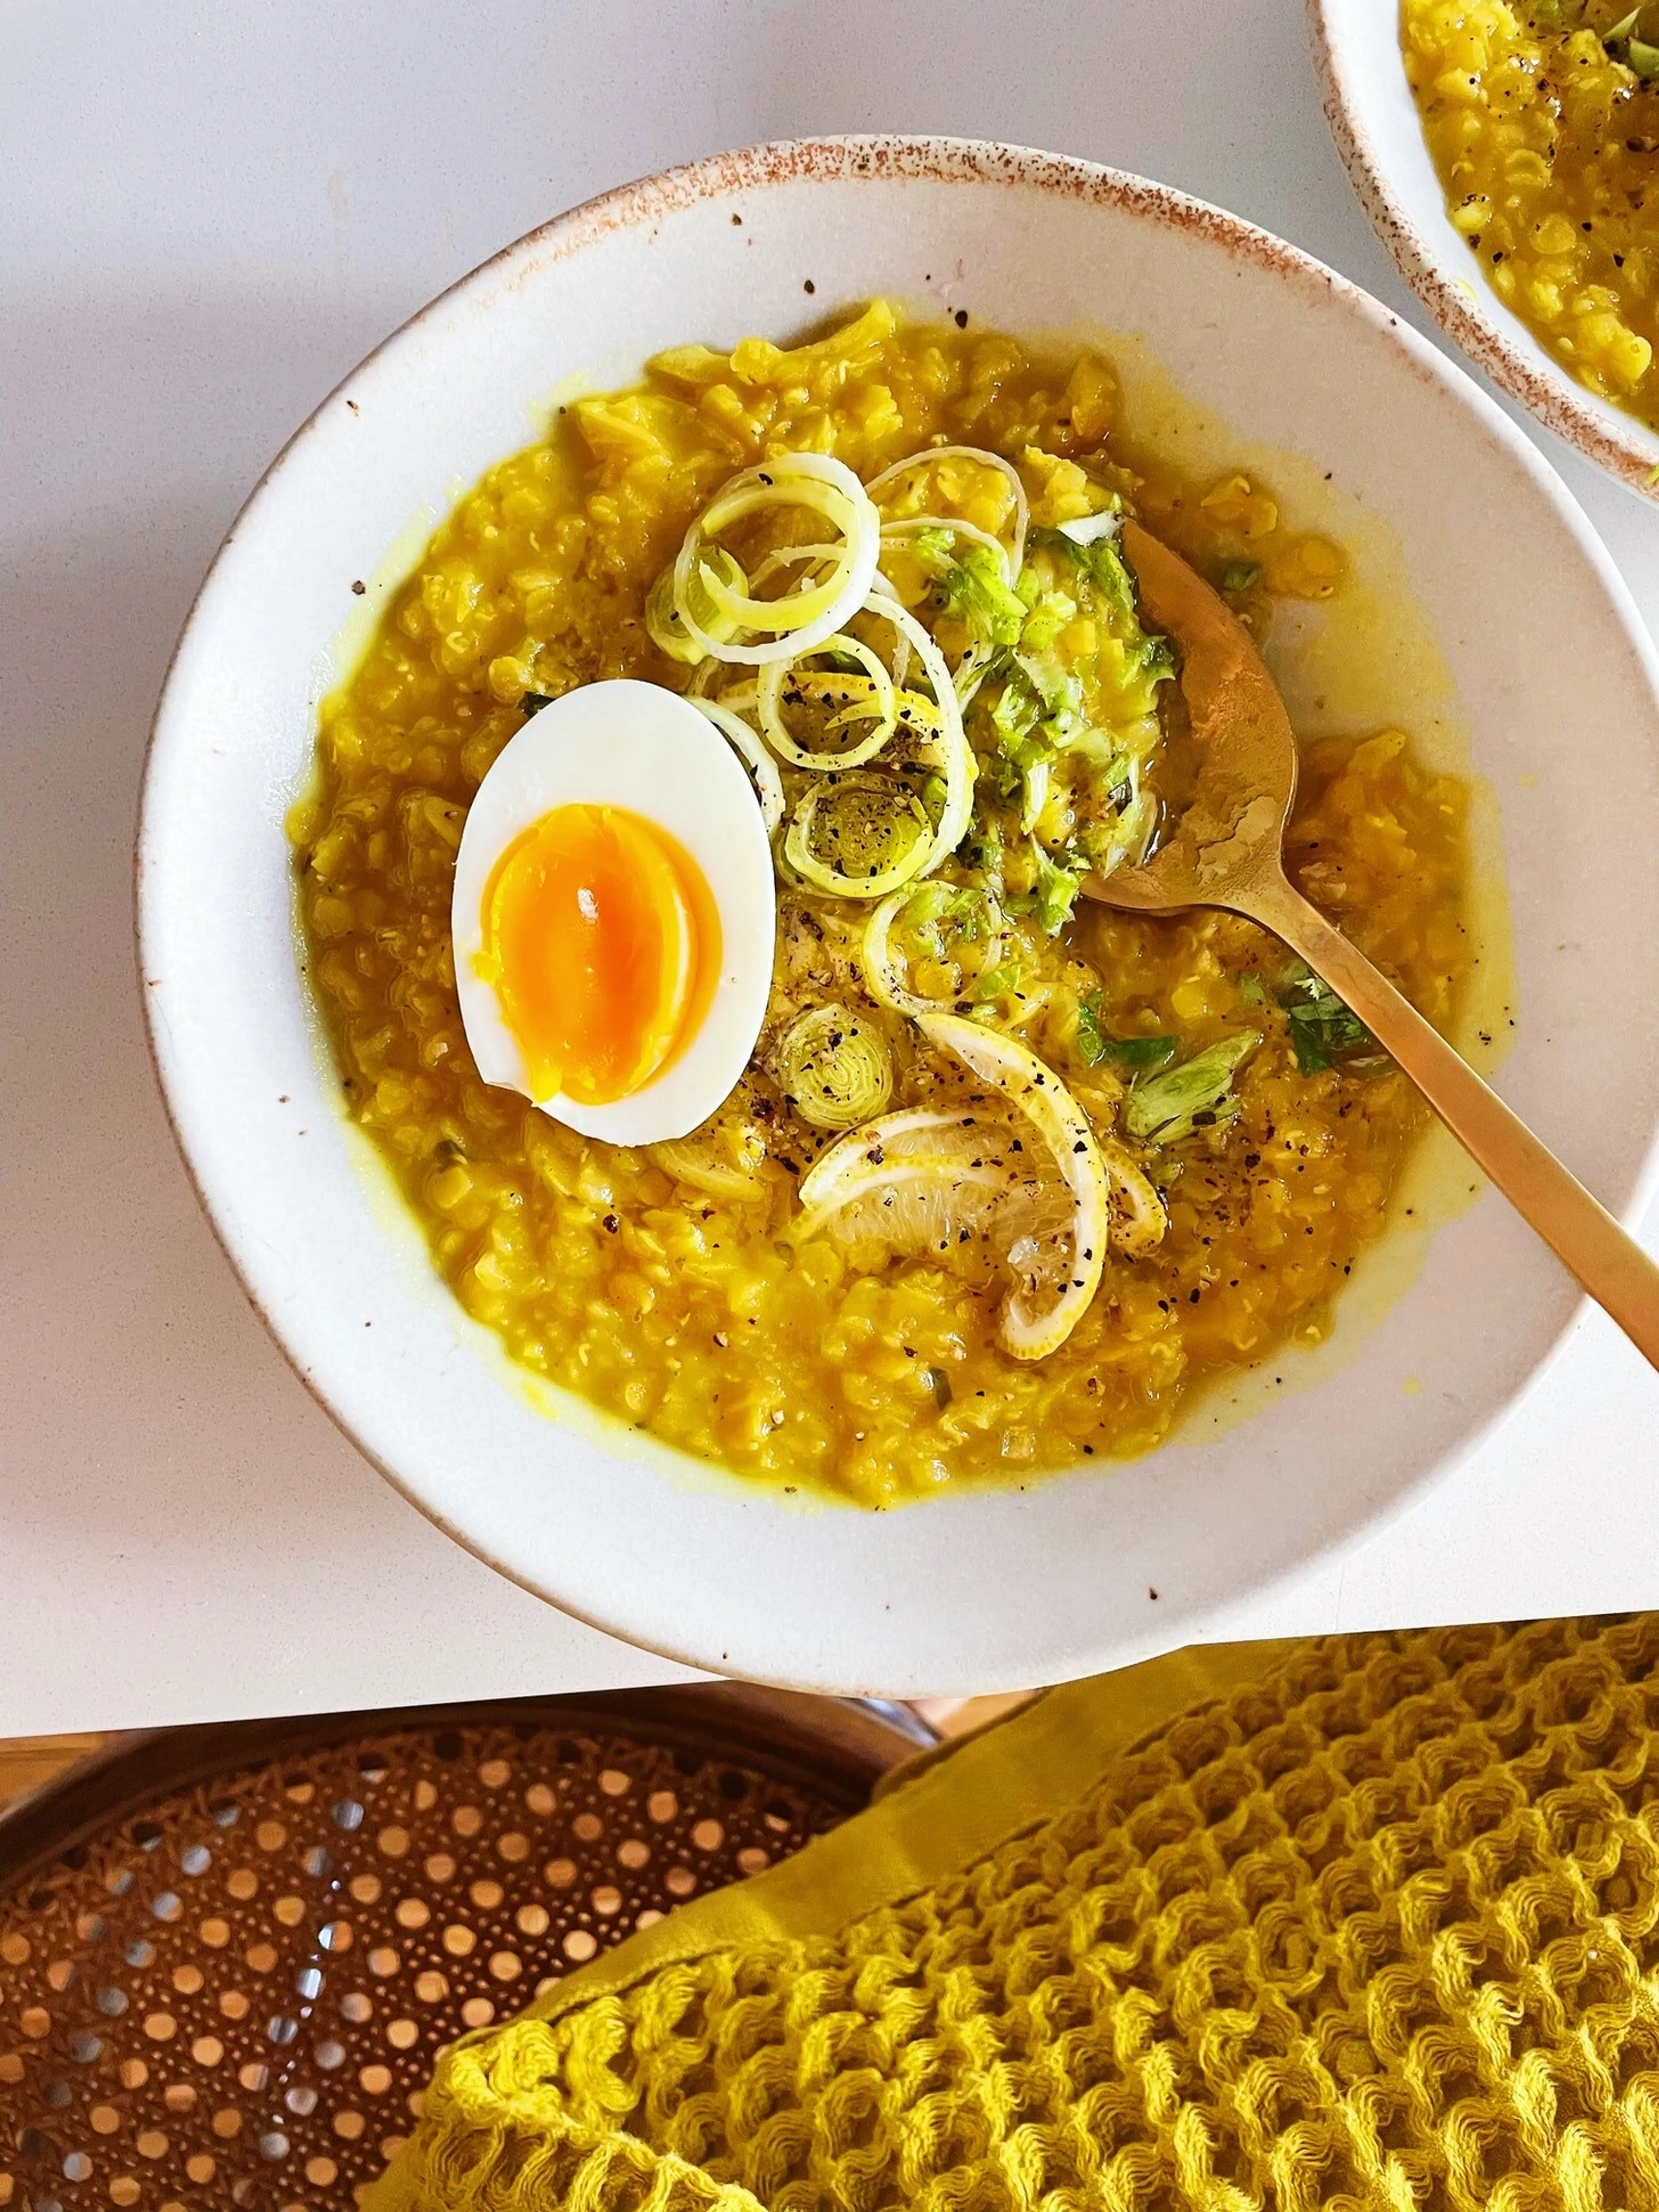 Lentils (Daal) with Fried Lemon and Garlic